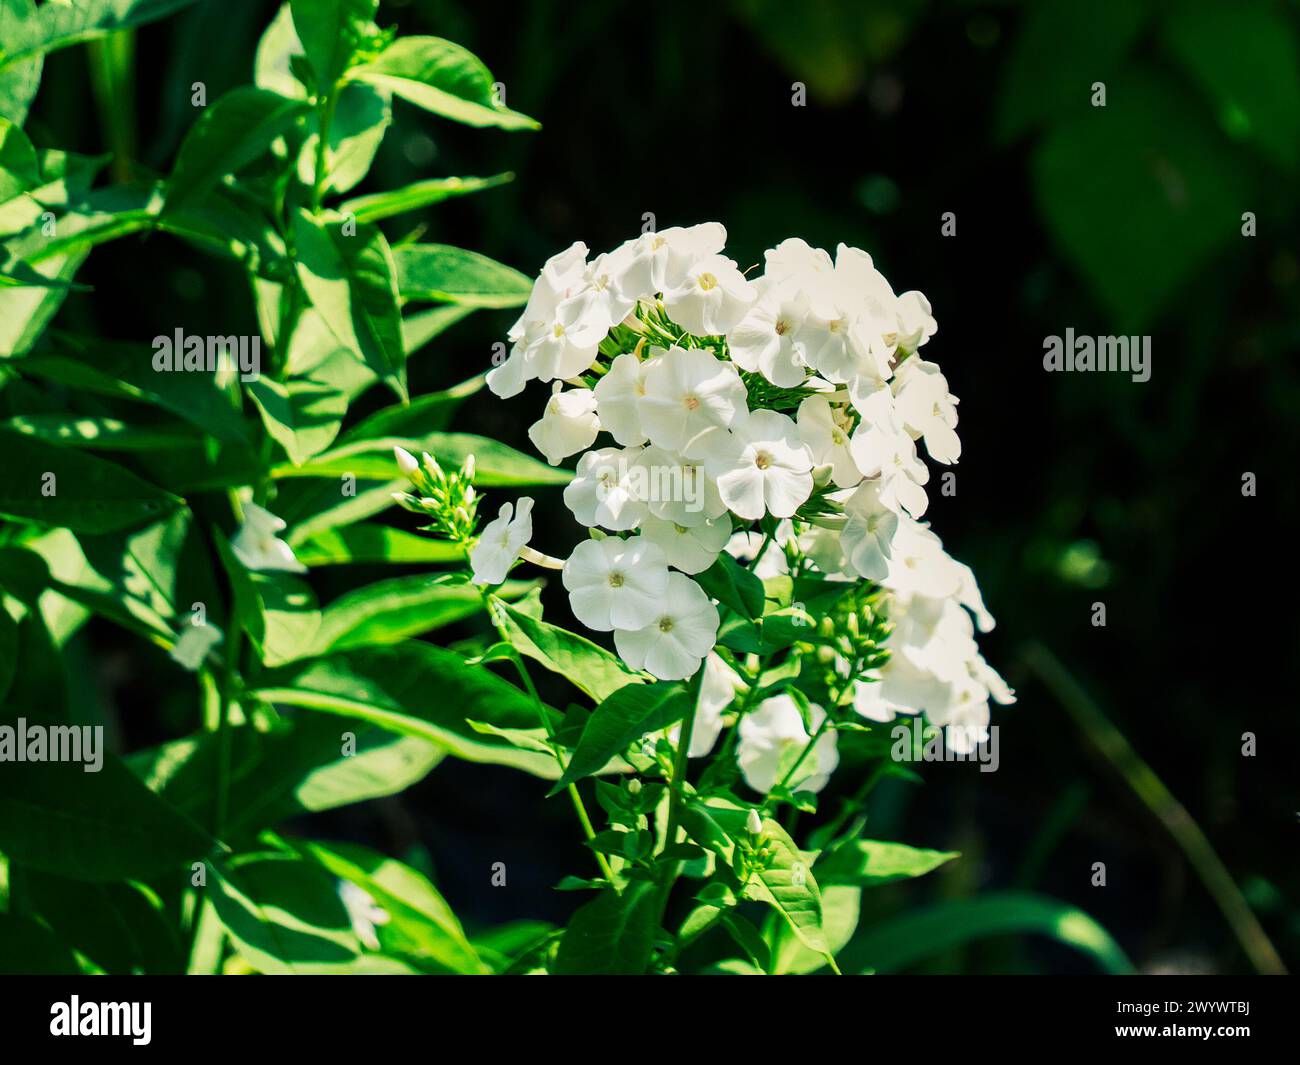 A vibrant display of white flowers with yellow centers, nestled among dark green leaves. Ideal for nature-themed designs or wellness content. Stock Photo